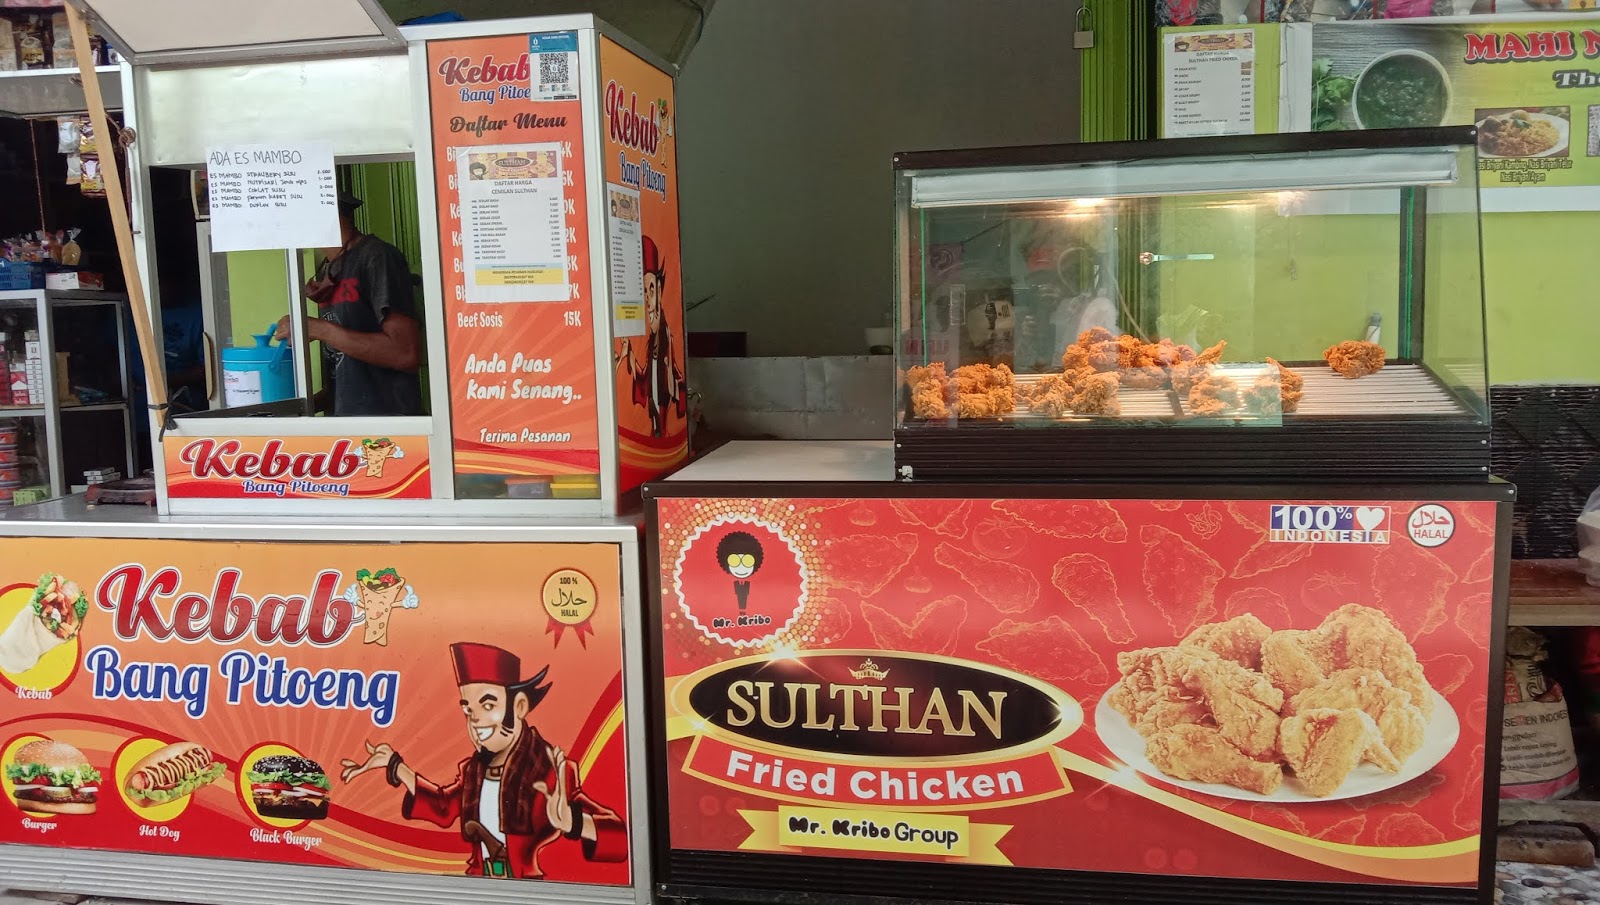 SULTHAN Fried Chicken